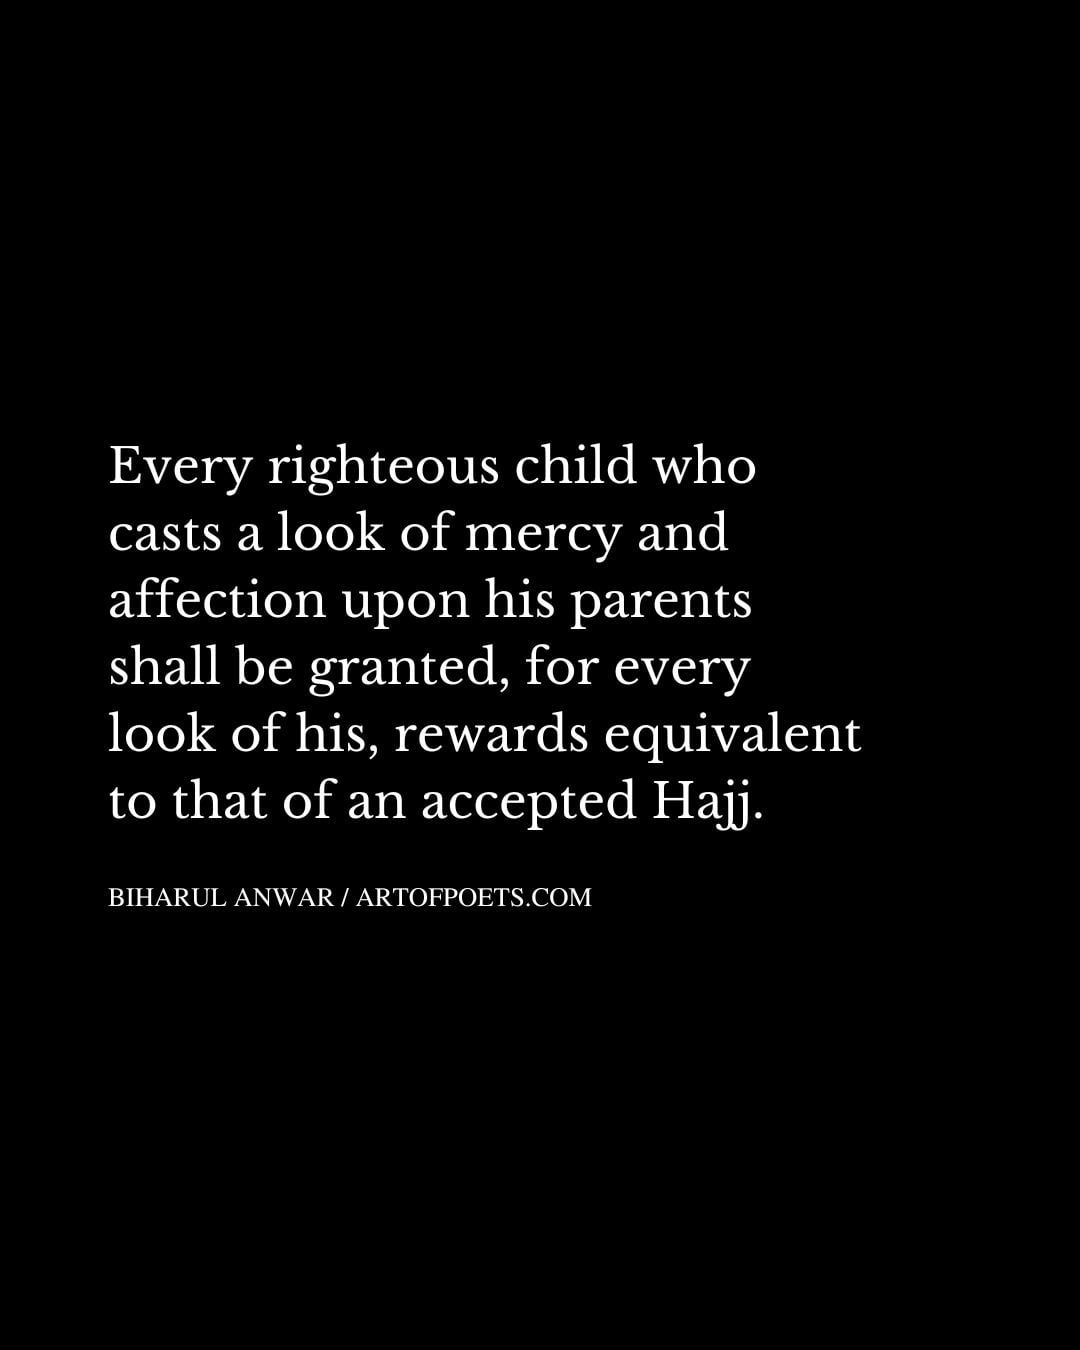 Every righteous child who casts a look of mercy and affection upon his parents shall be granted